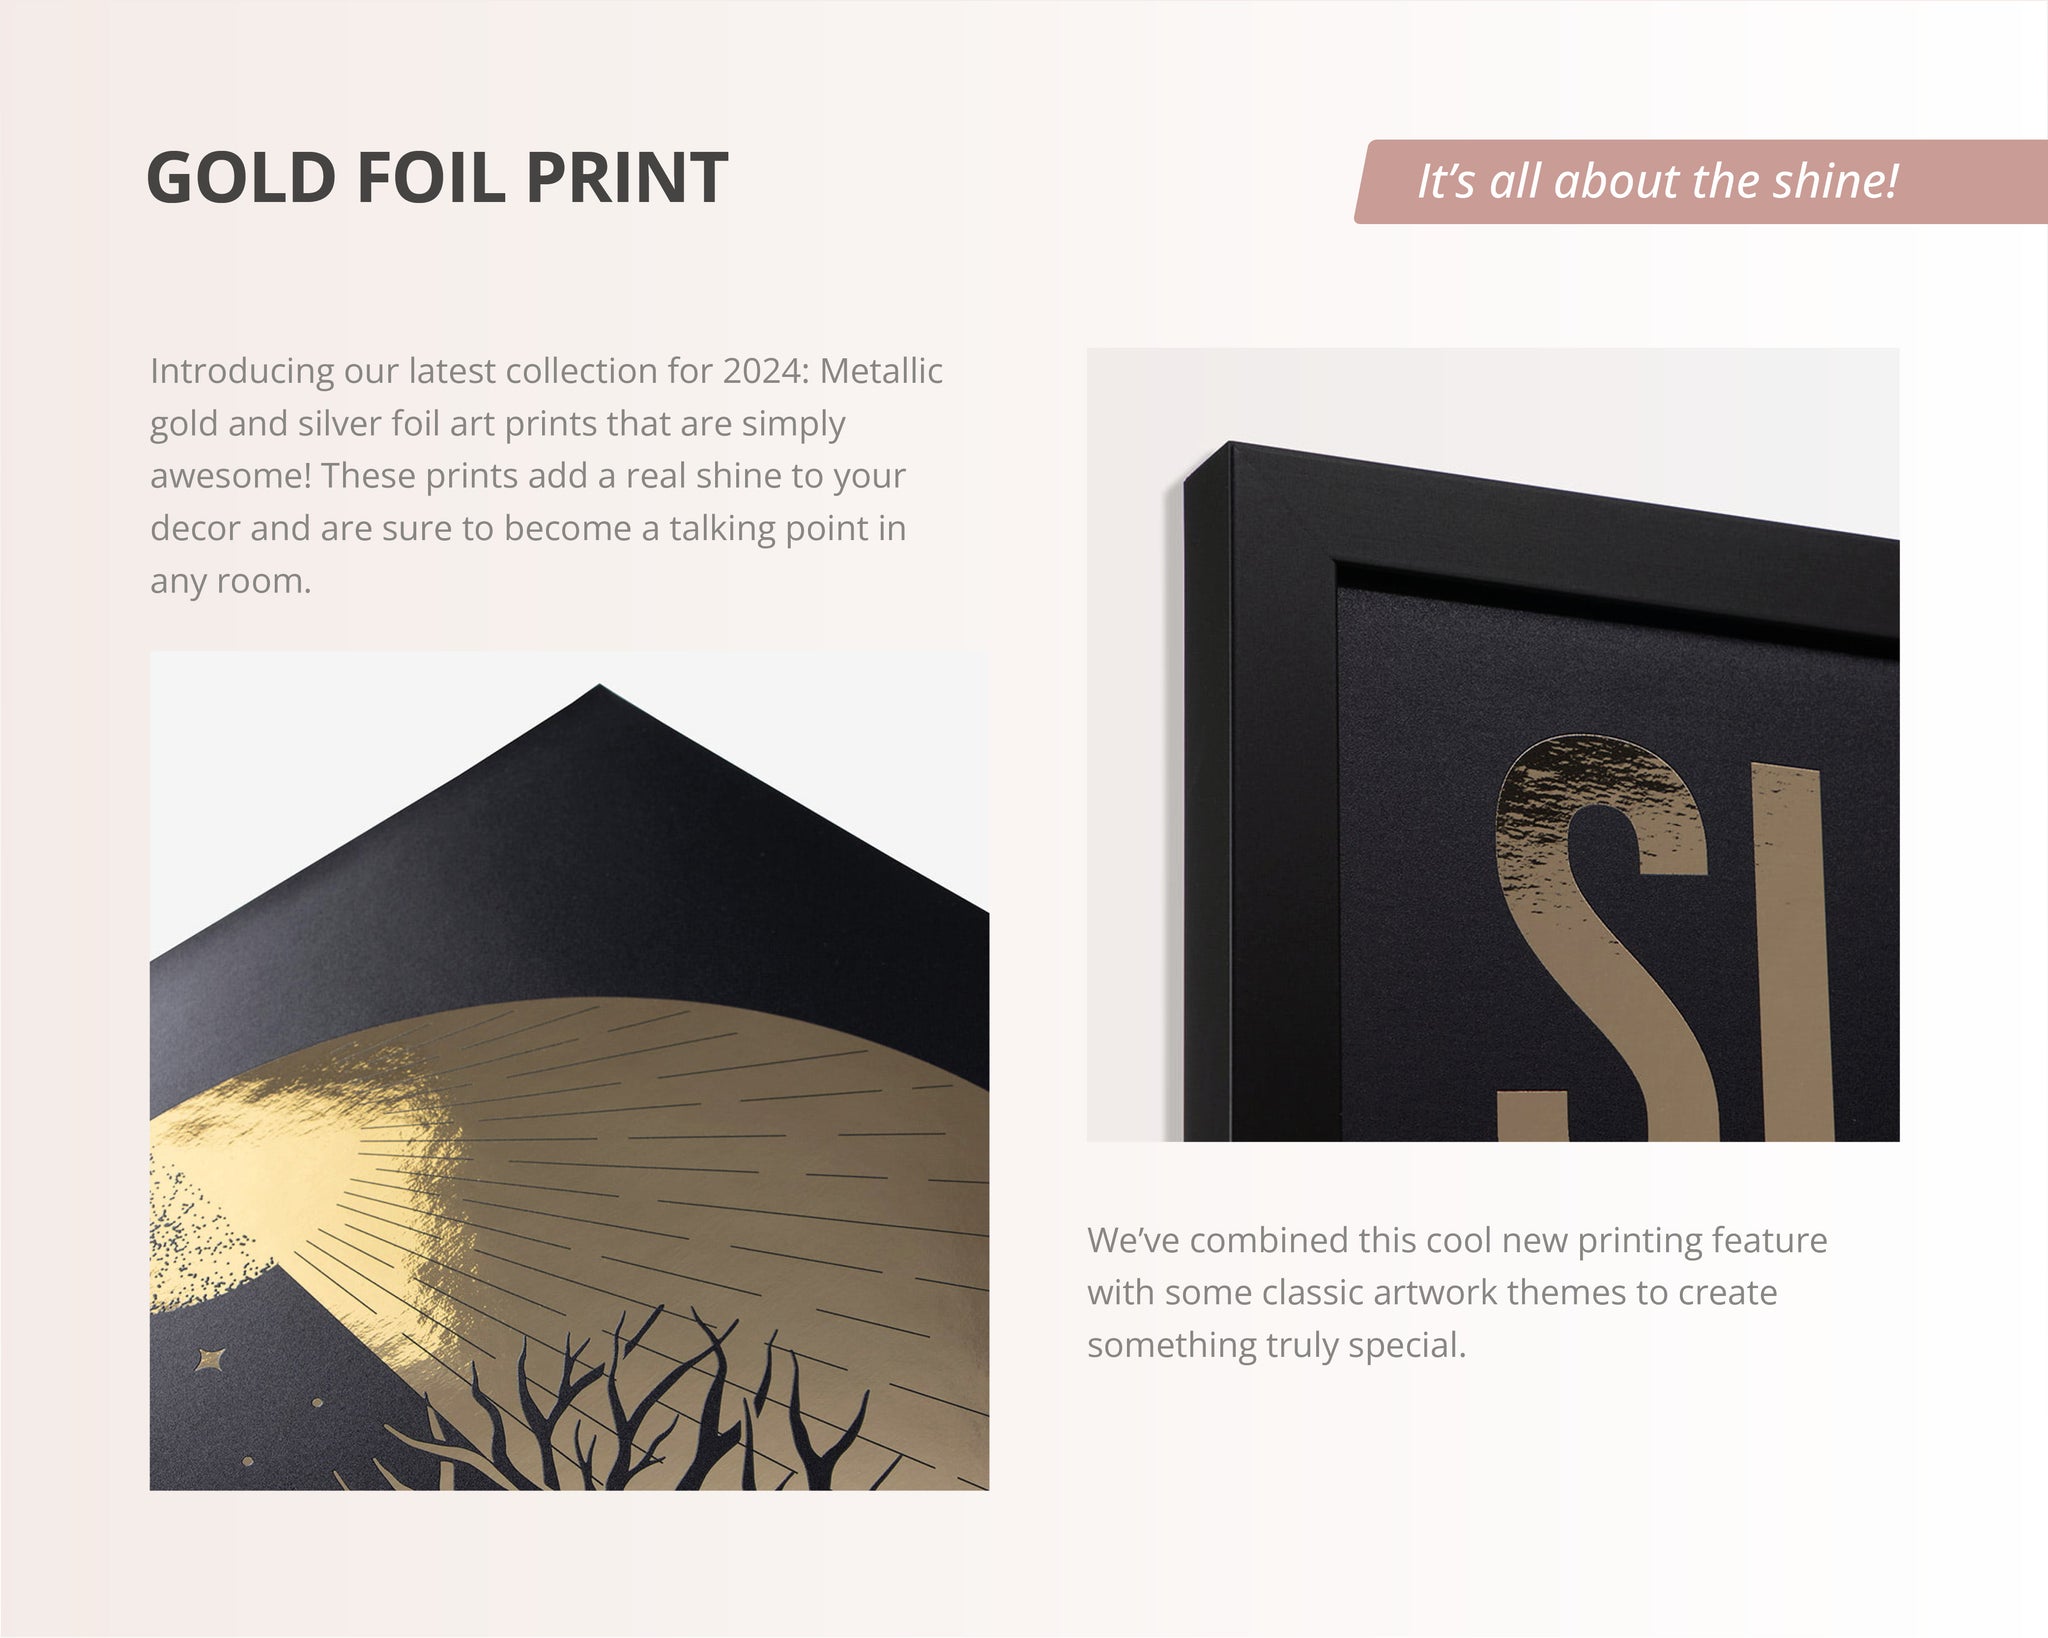 HAVE A NICE DAY GOLD FOIL PRINT